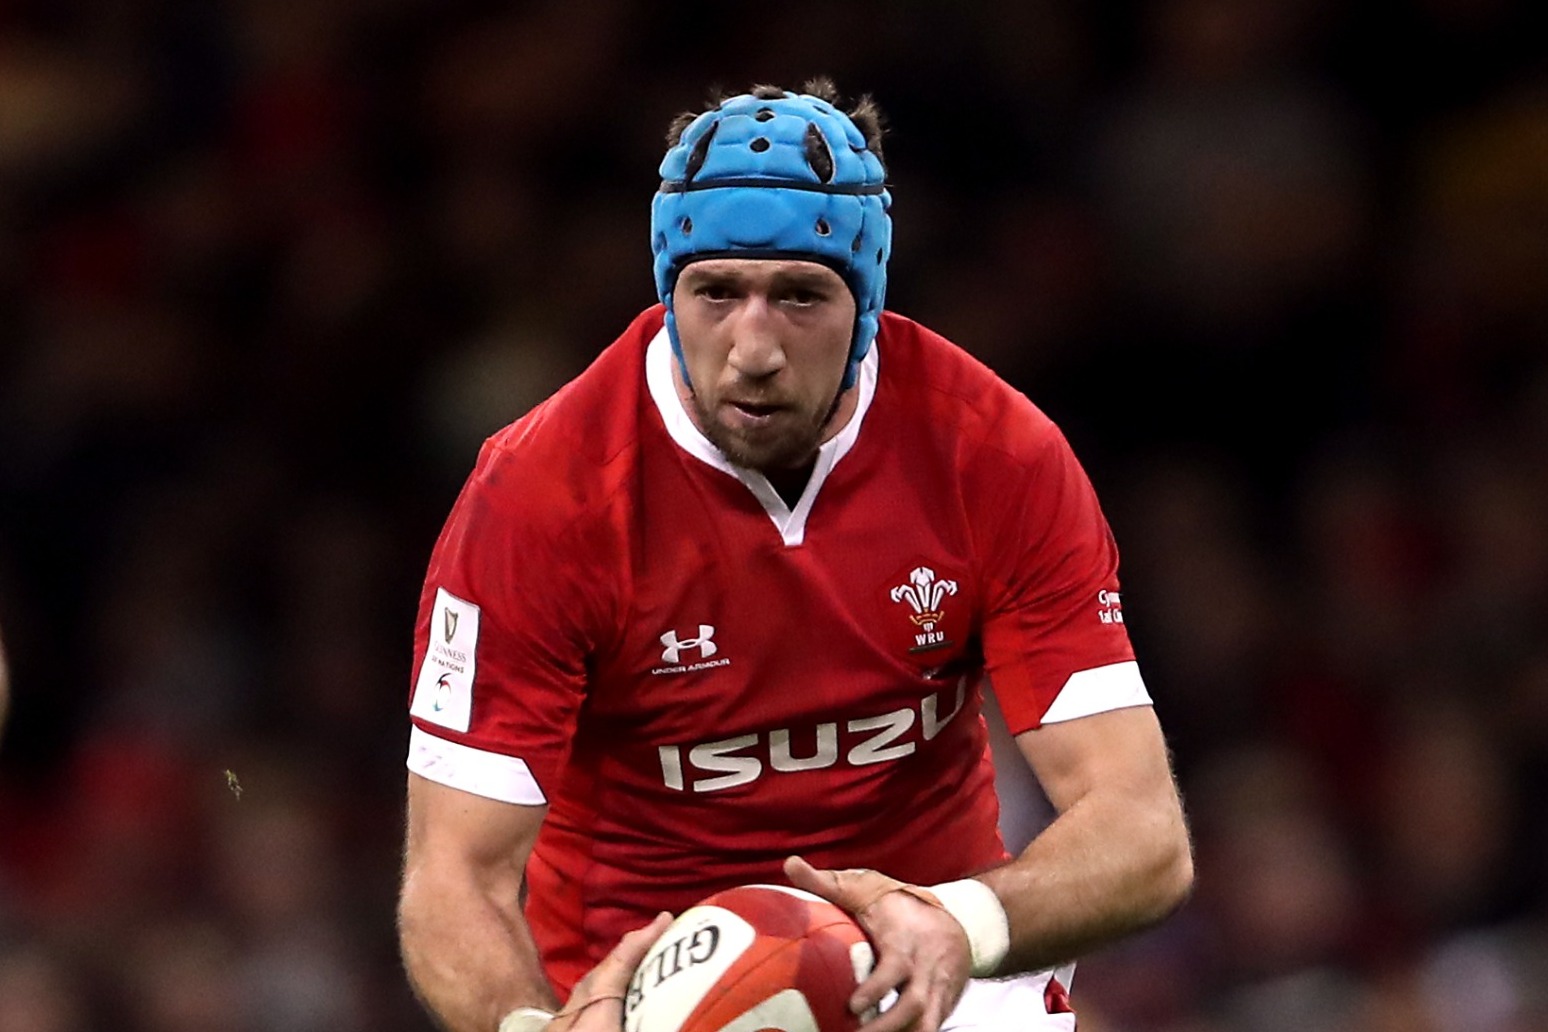 Wales name Justin Tipuric as skipper for Autumn Nations Series 